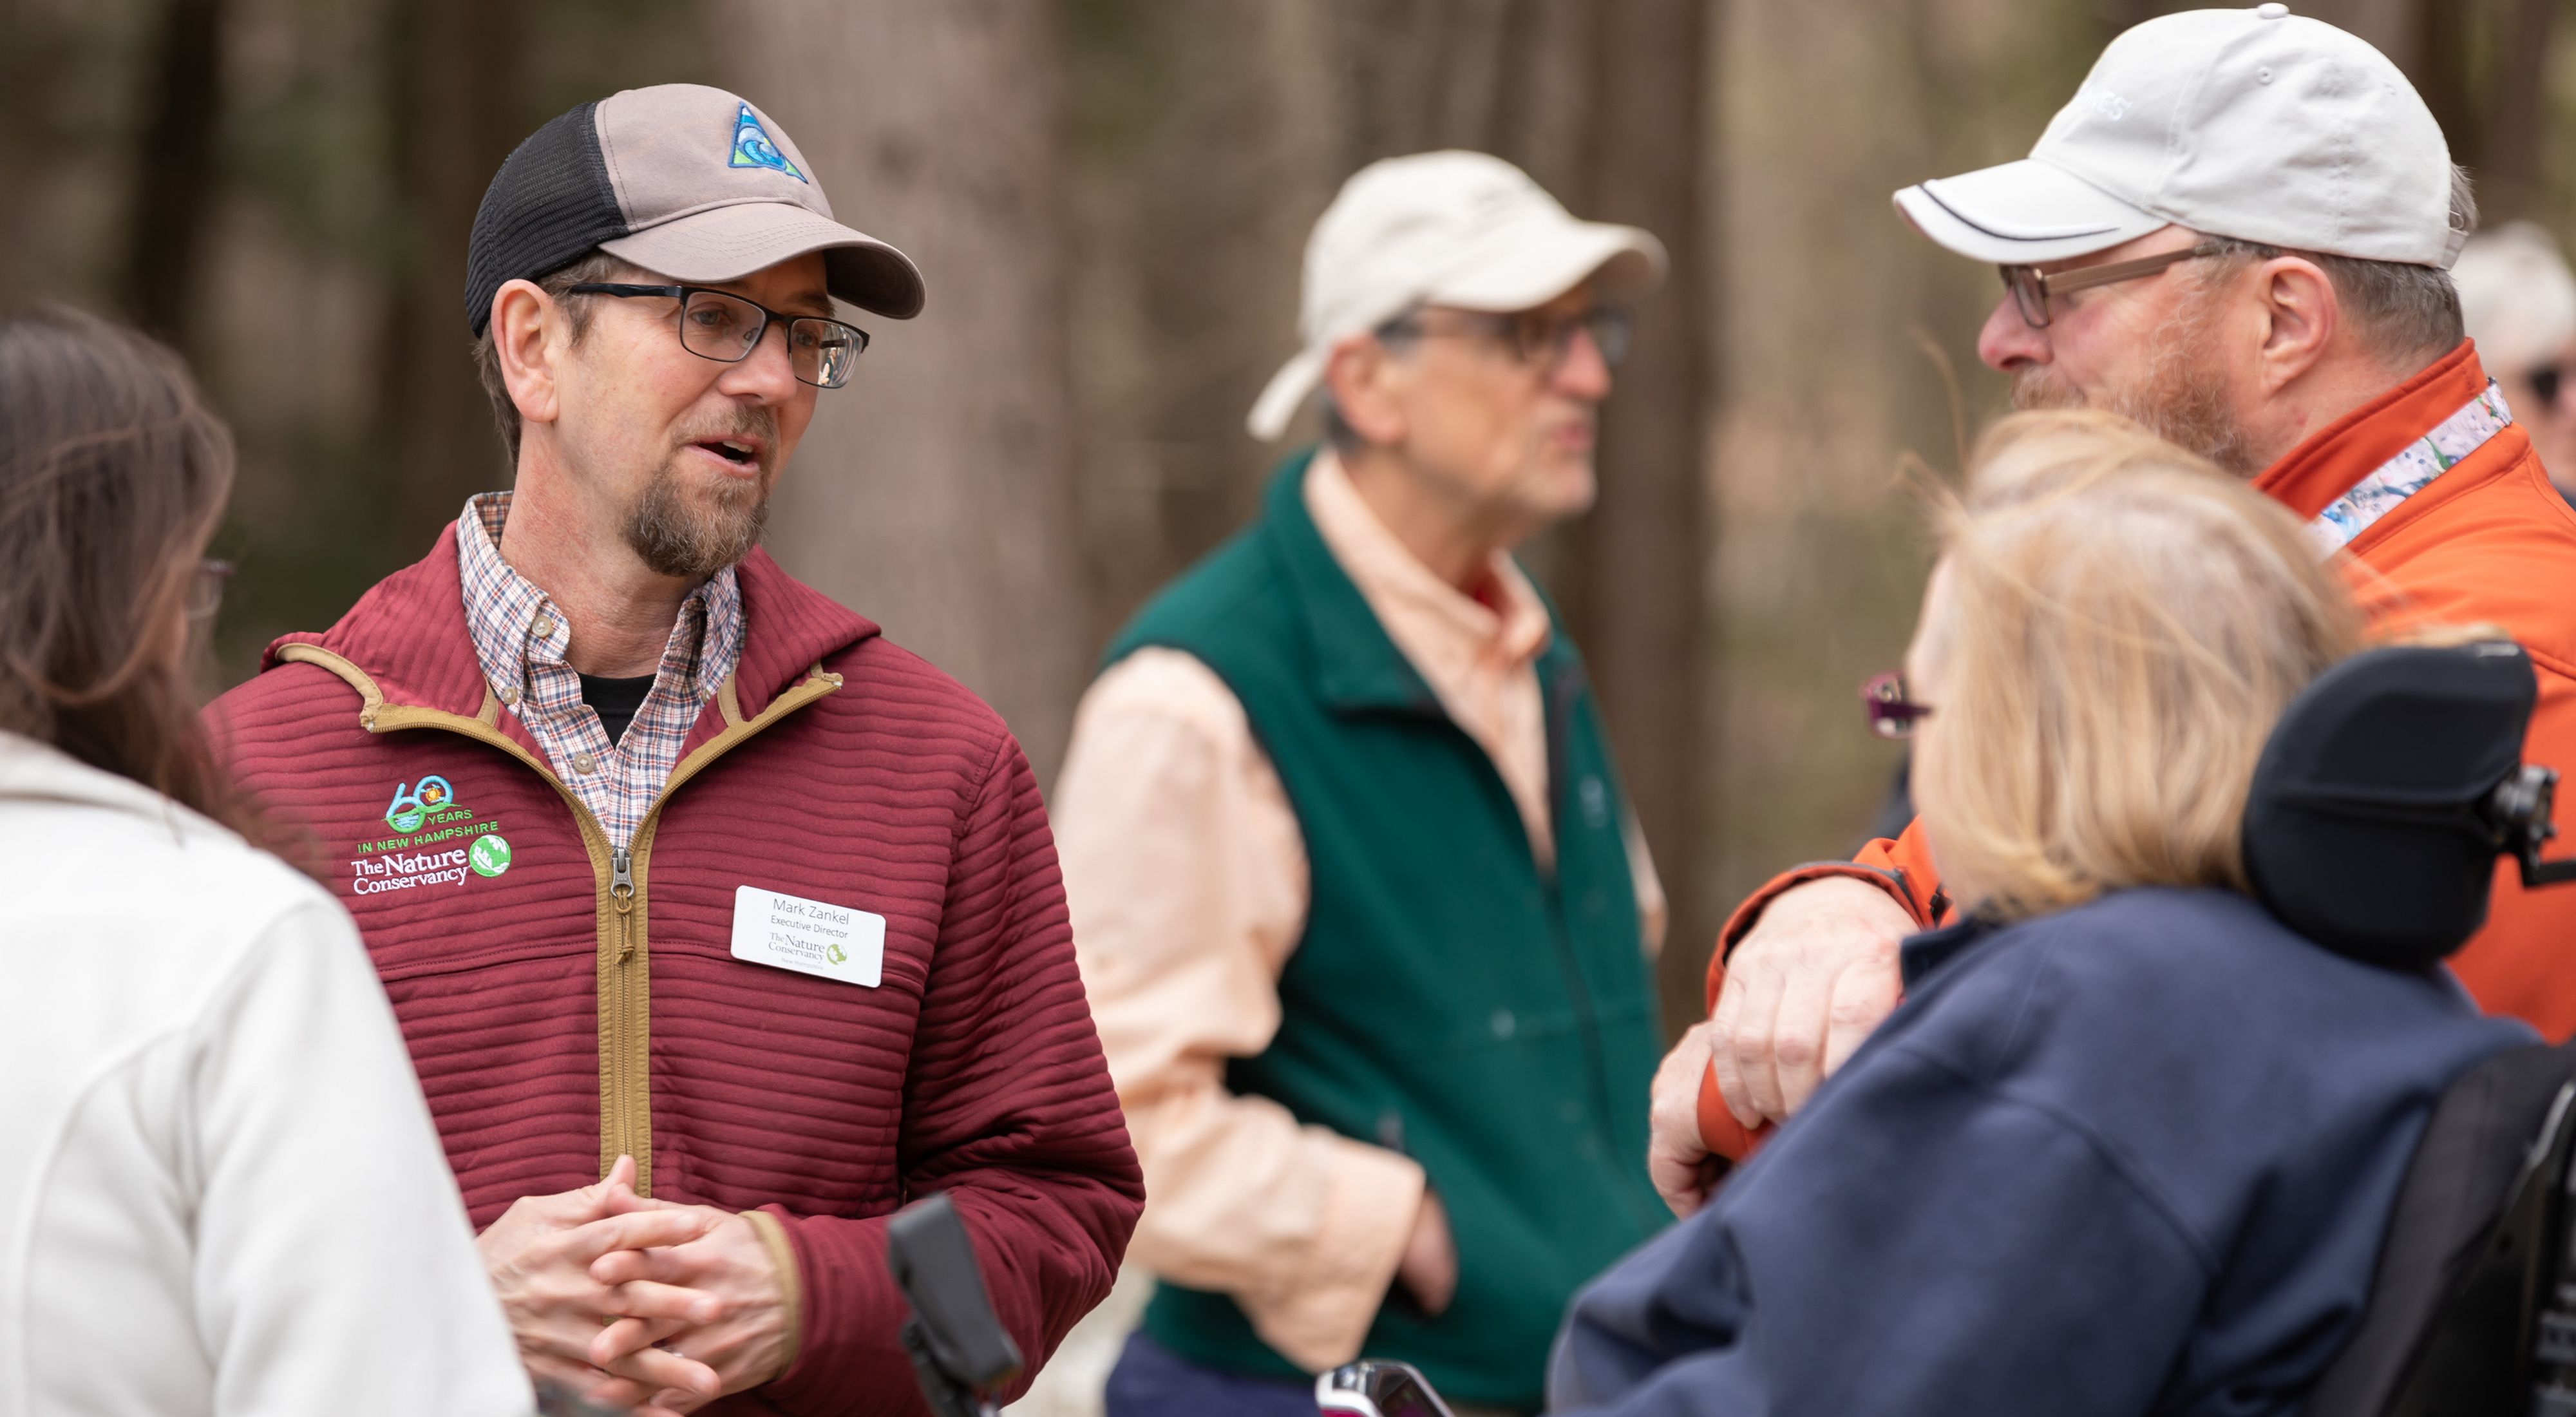 Mark Zankel speaks with a couple at a trailhead in the woods.